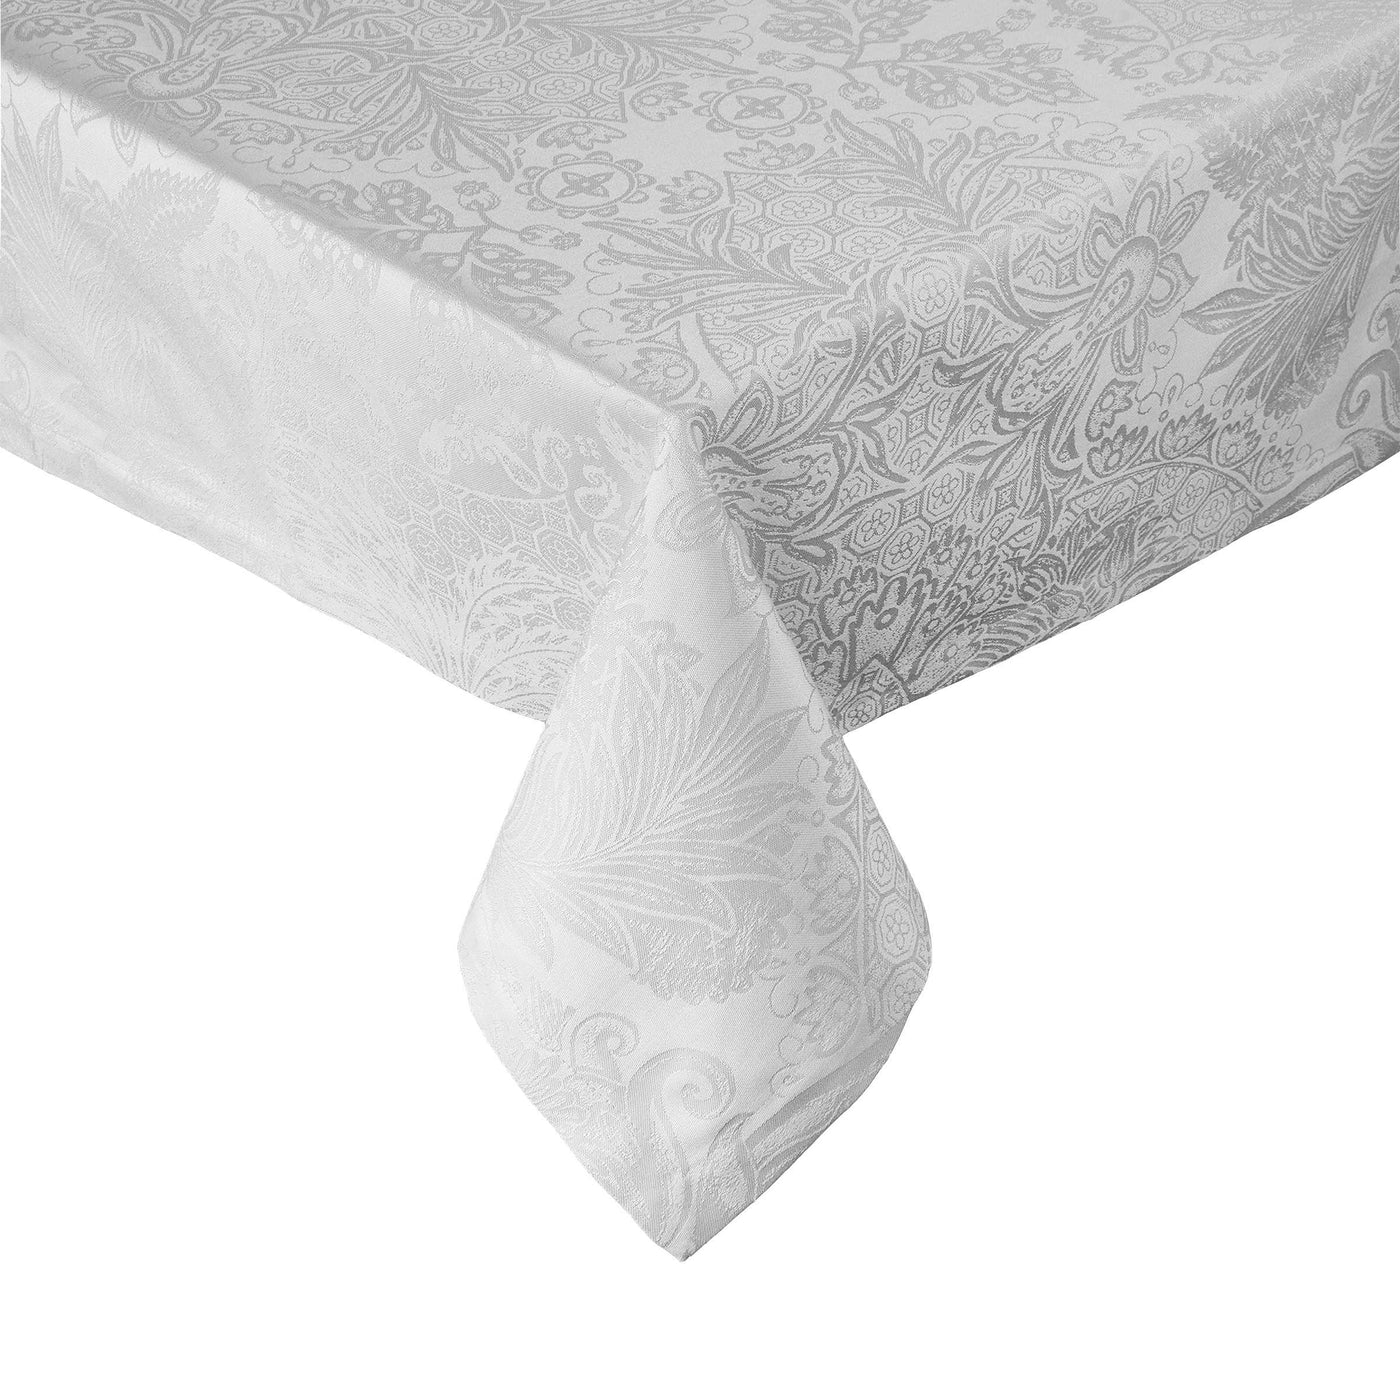 WILLOW BOUGHS Tablecloth L 160 x W 160cm